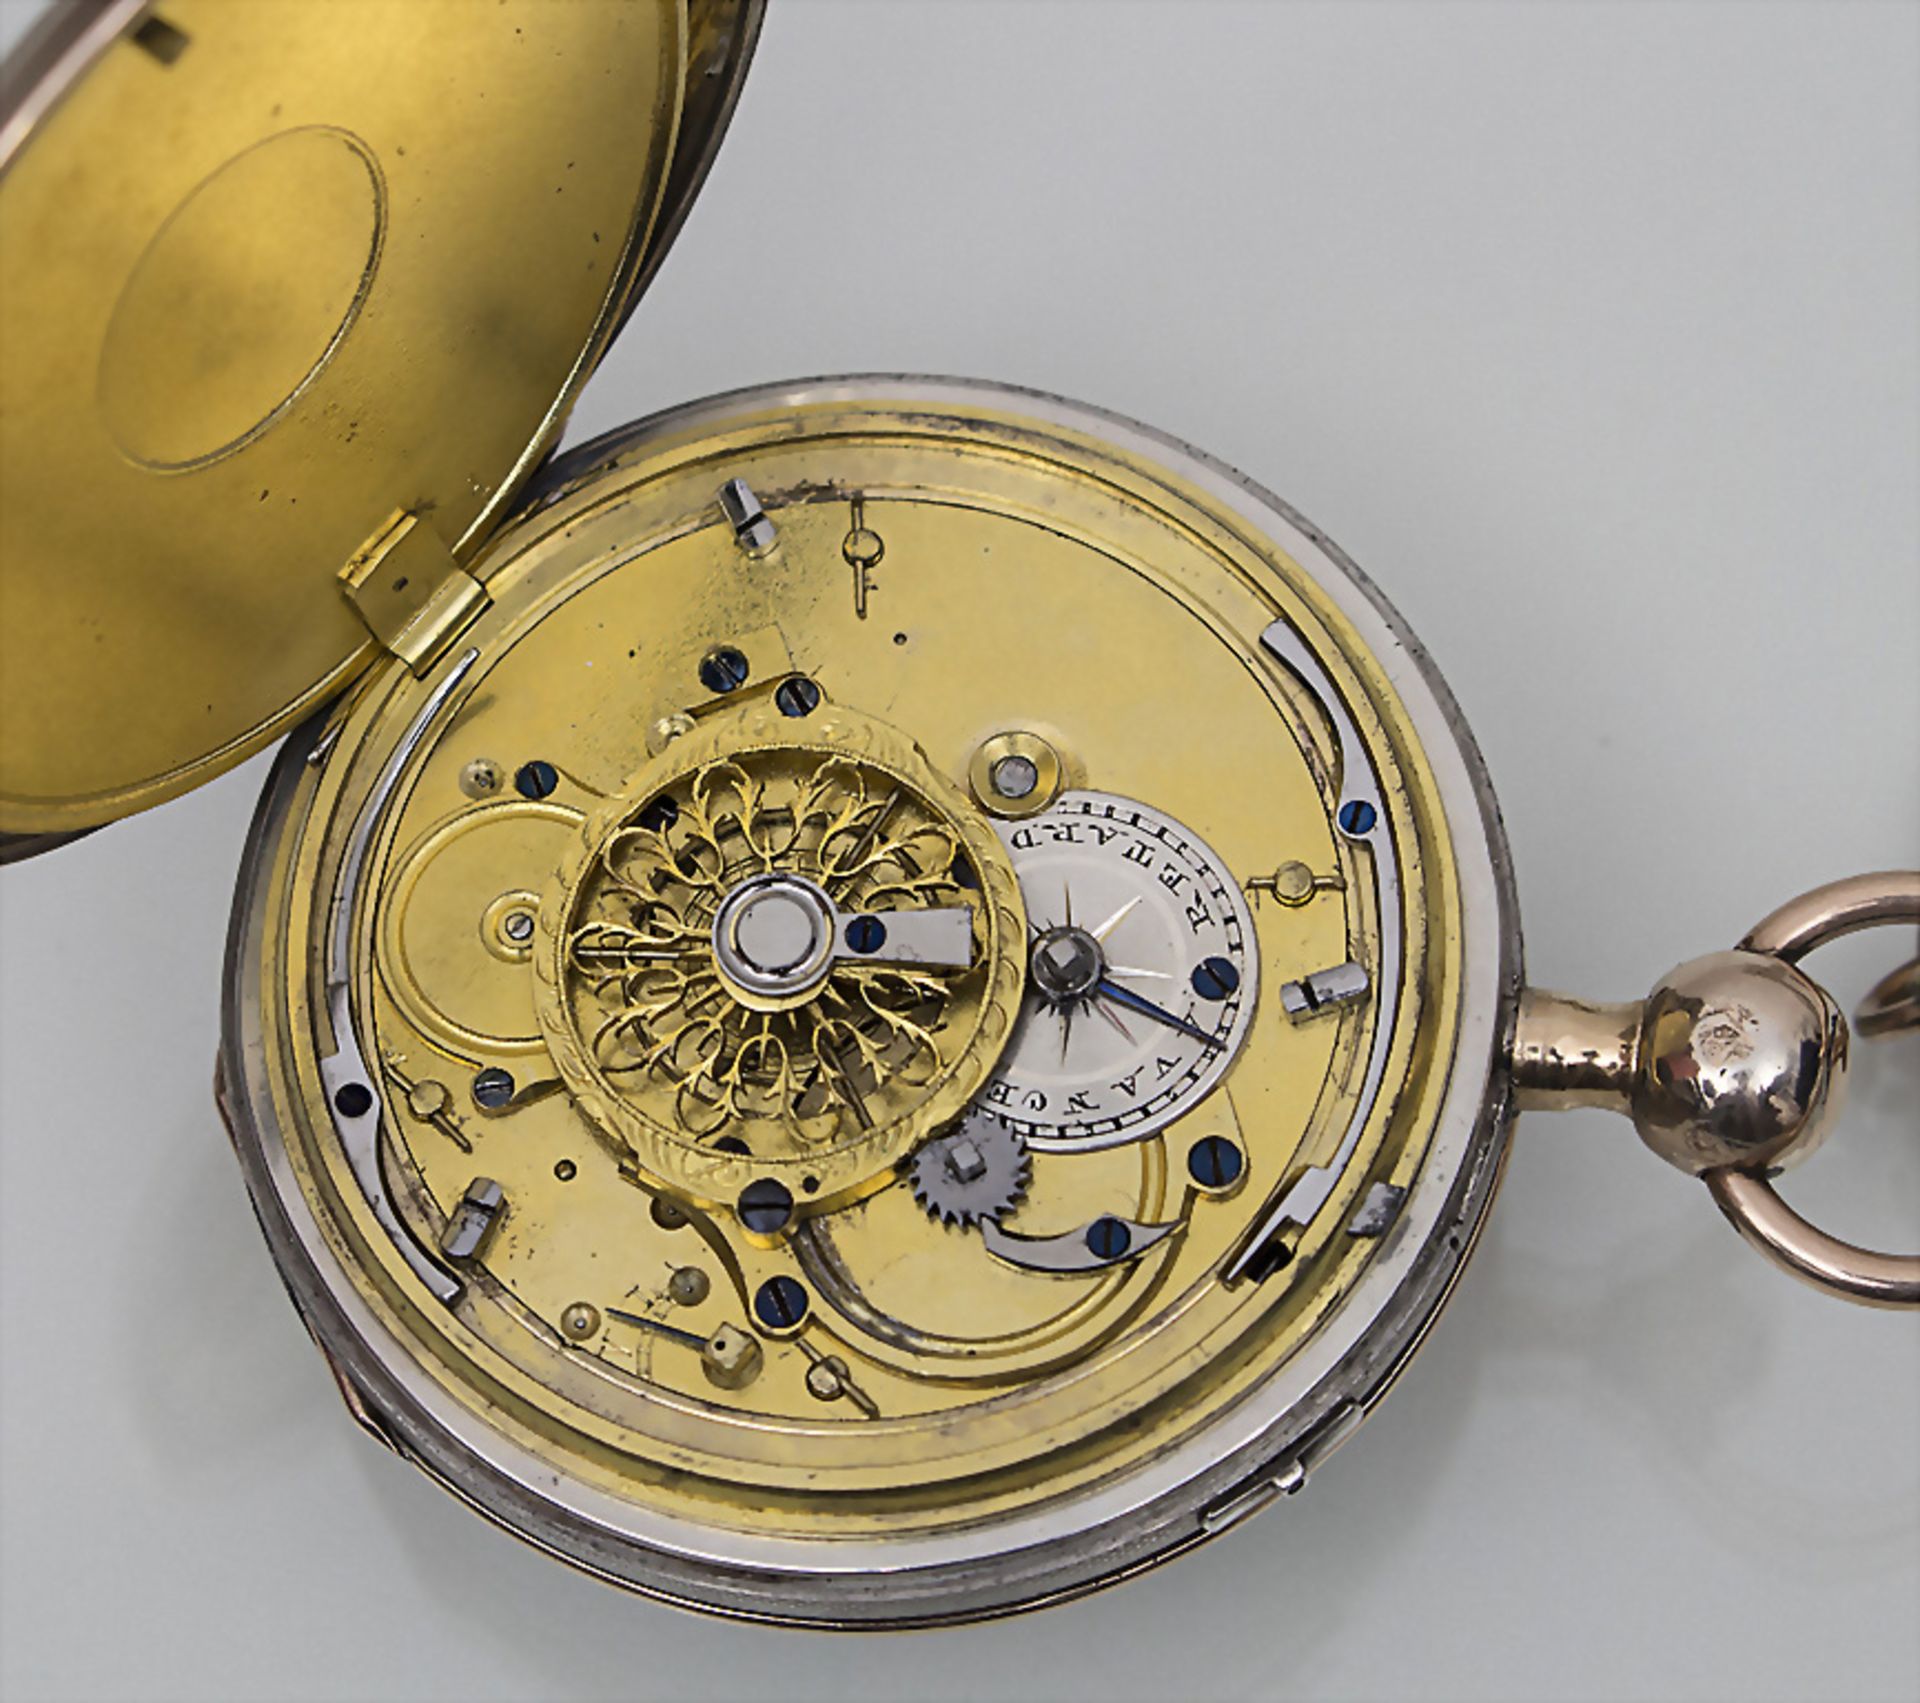 Taschenuhr / Pocket Watch, ¼-Repetition, Swiss Made, ca. 1850 - Image 2 of 2